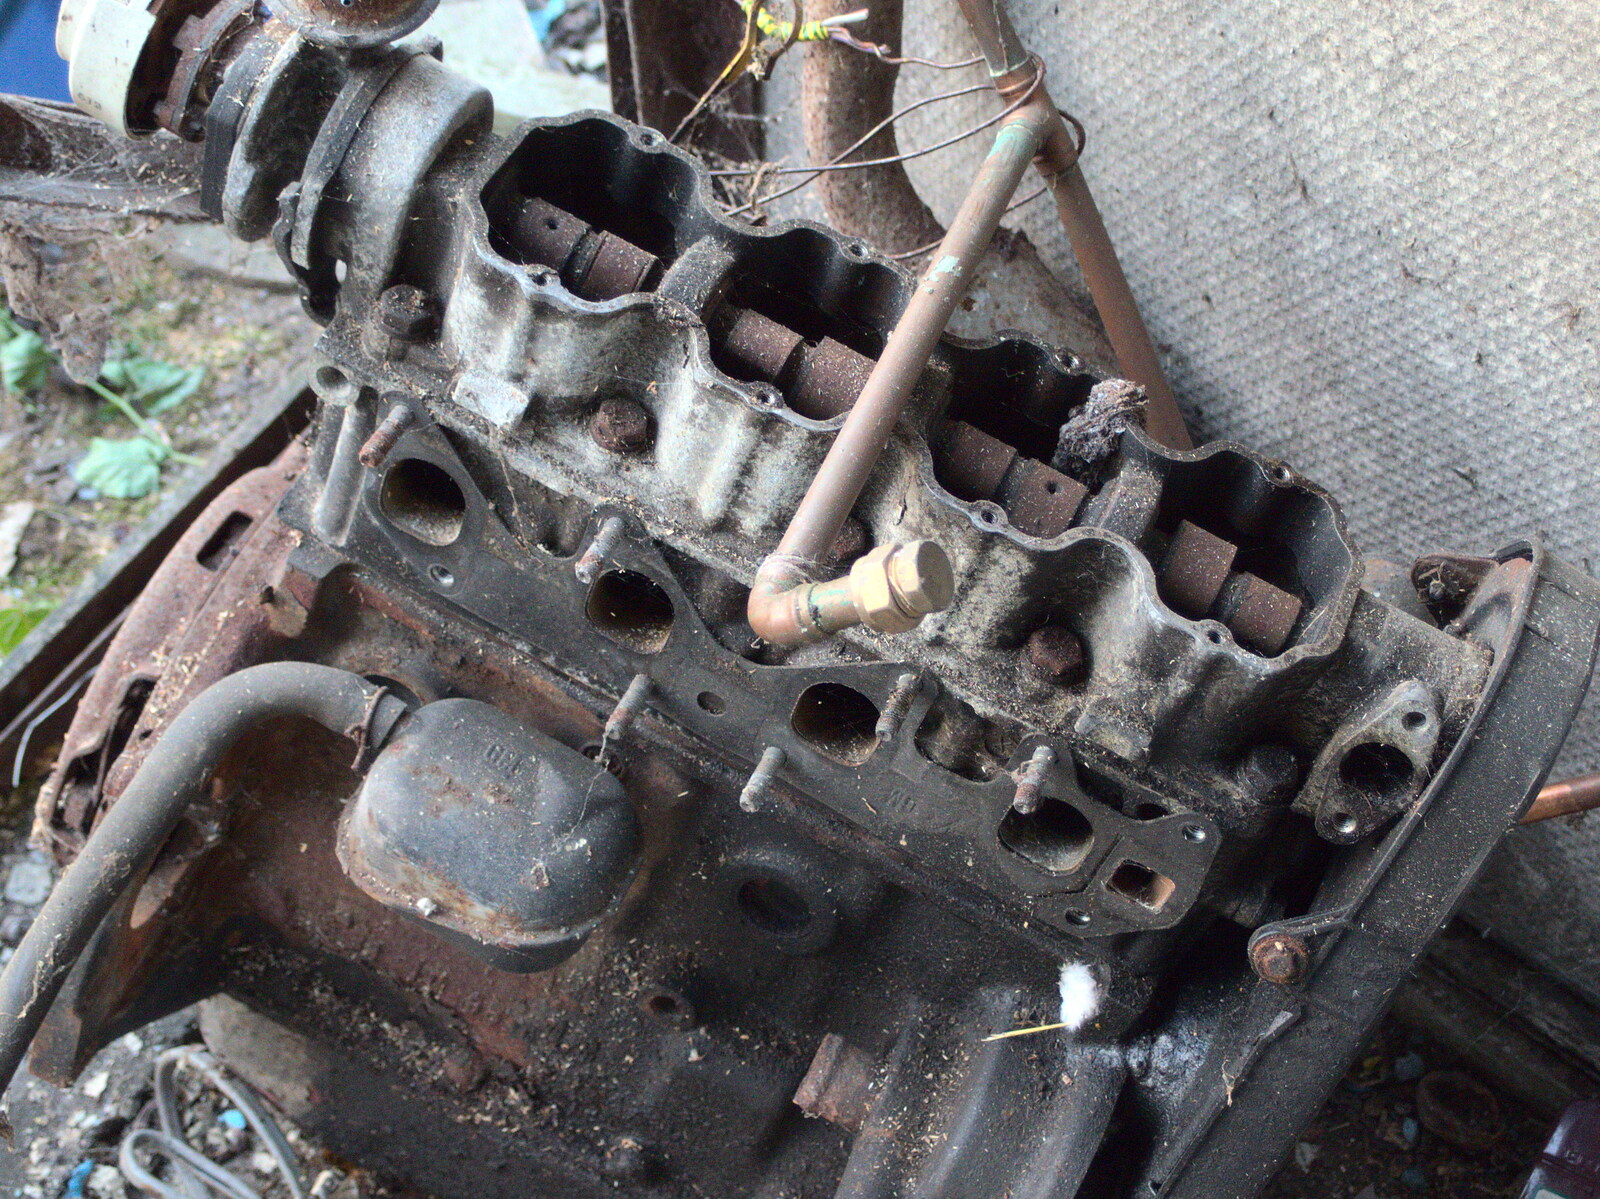 The engine from Nosher's first car from The Demolition of the Garage, Brome, Suffolk - 17th July 2013